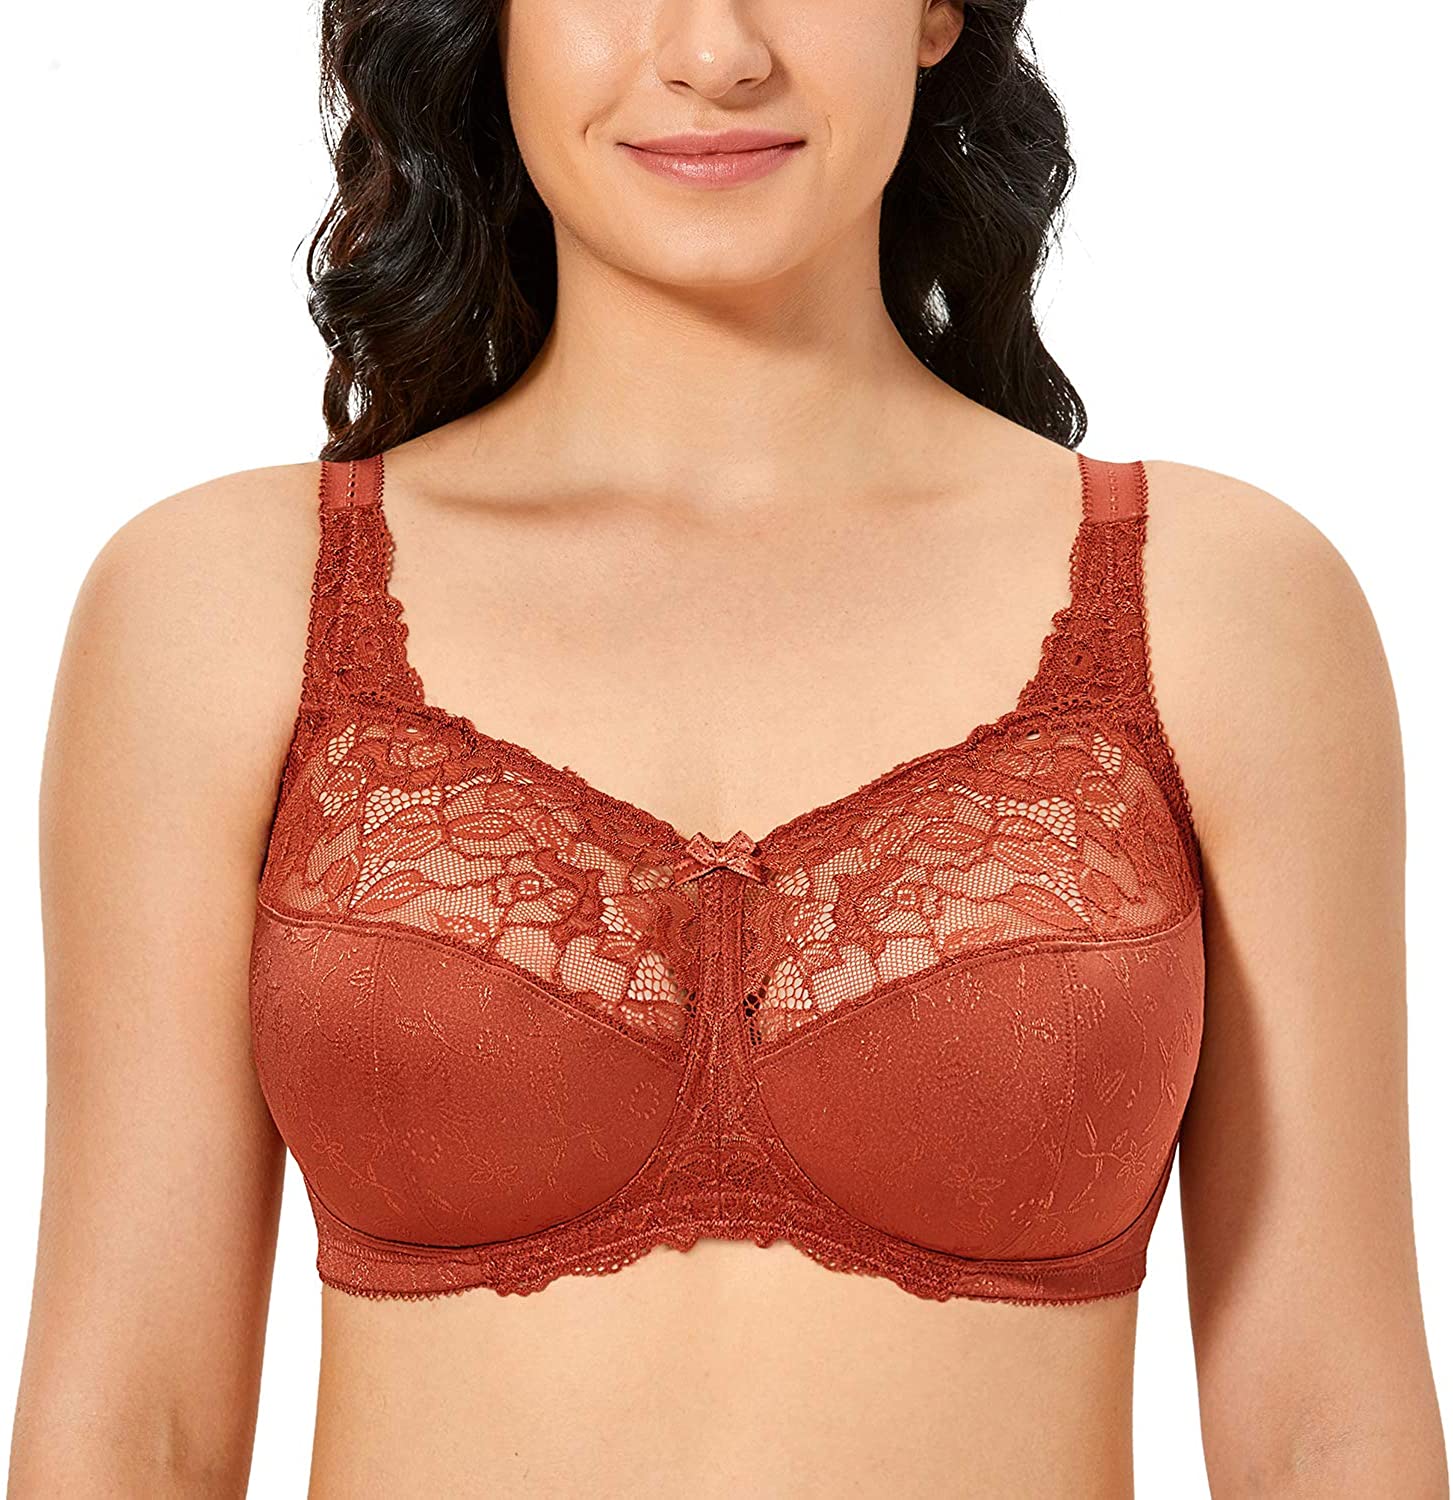 DELIMIRA Women's Plus Size Unlined Wire Free Lace Full Coverage Support Bra 